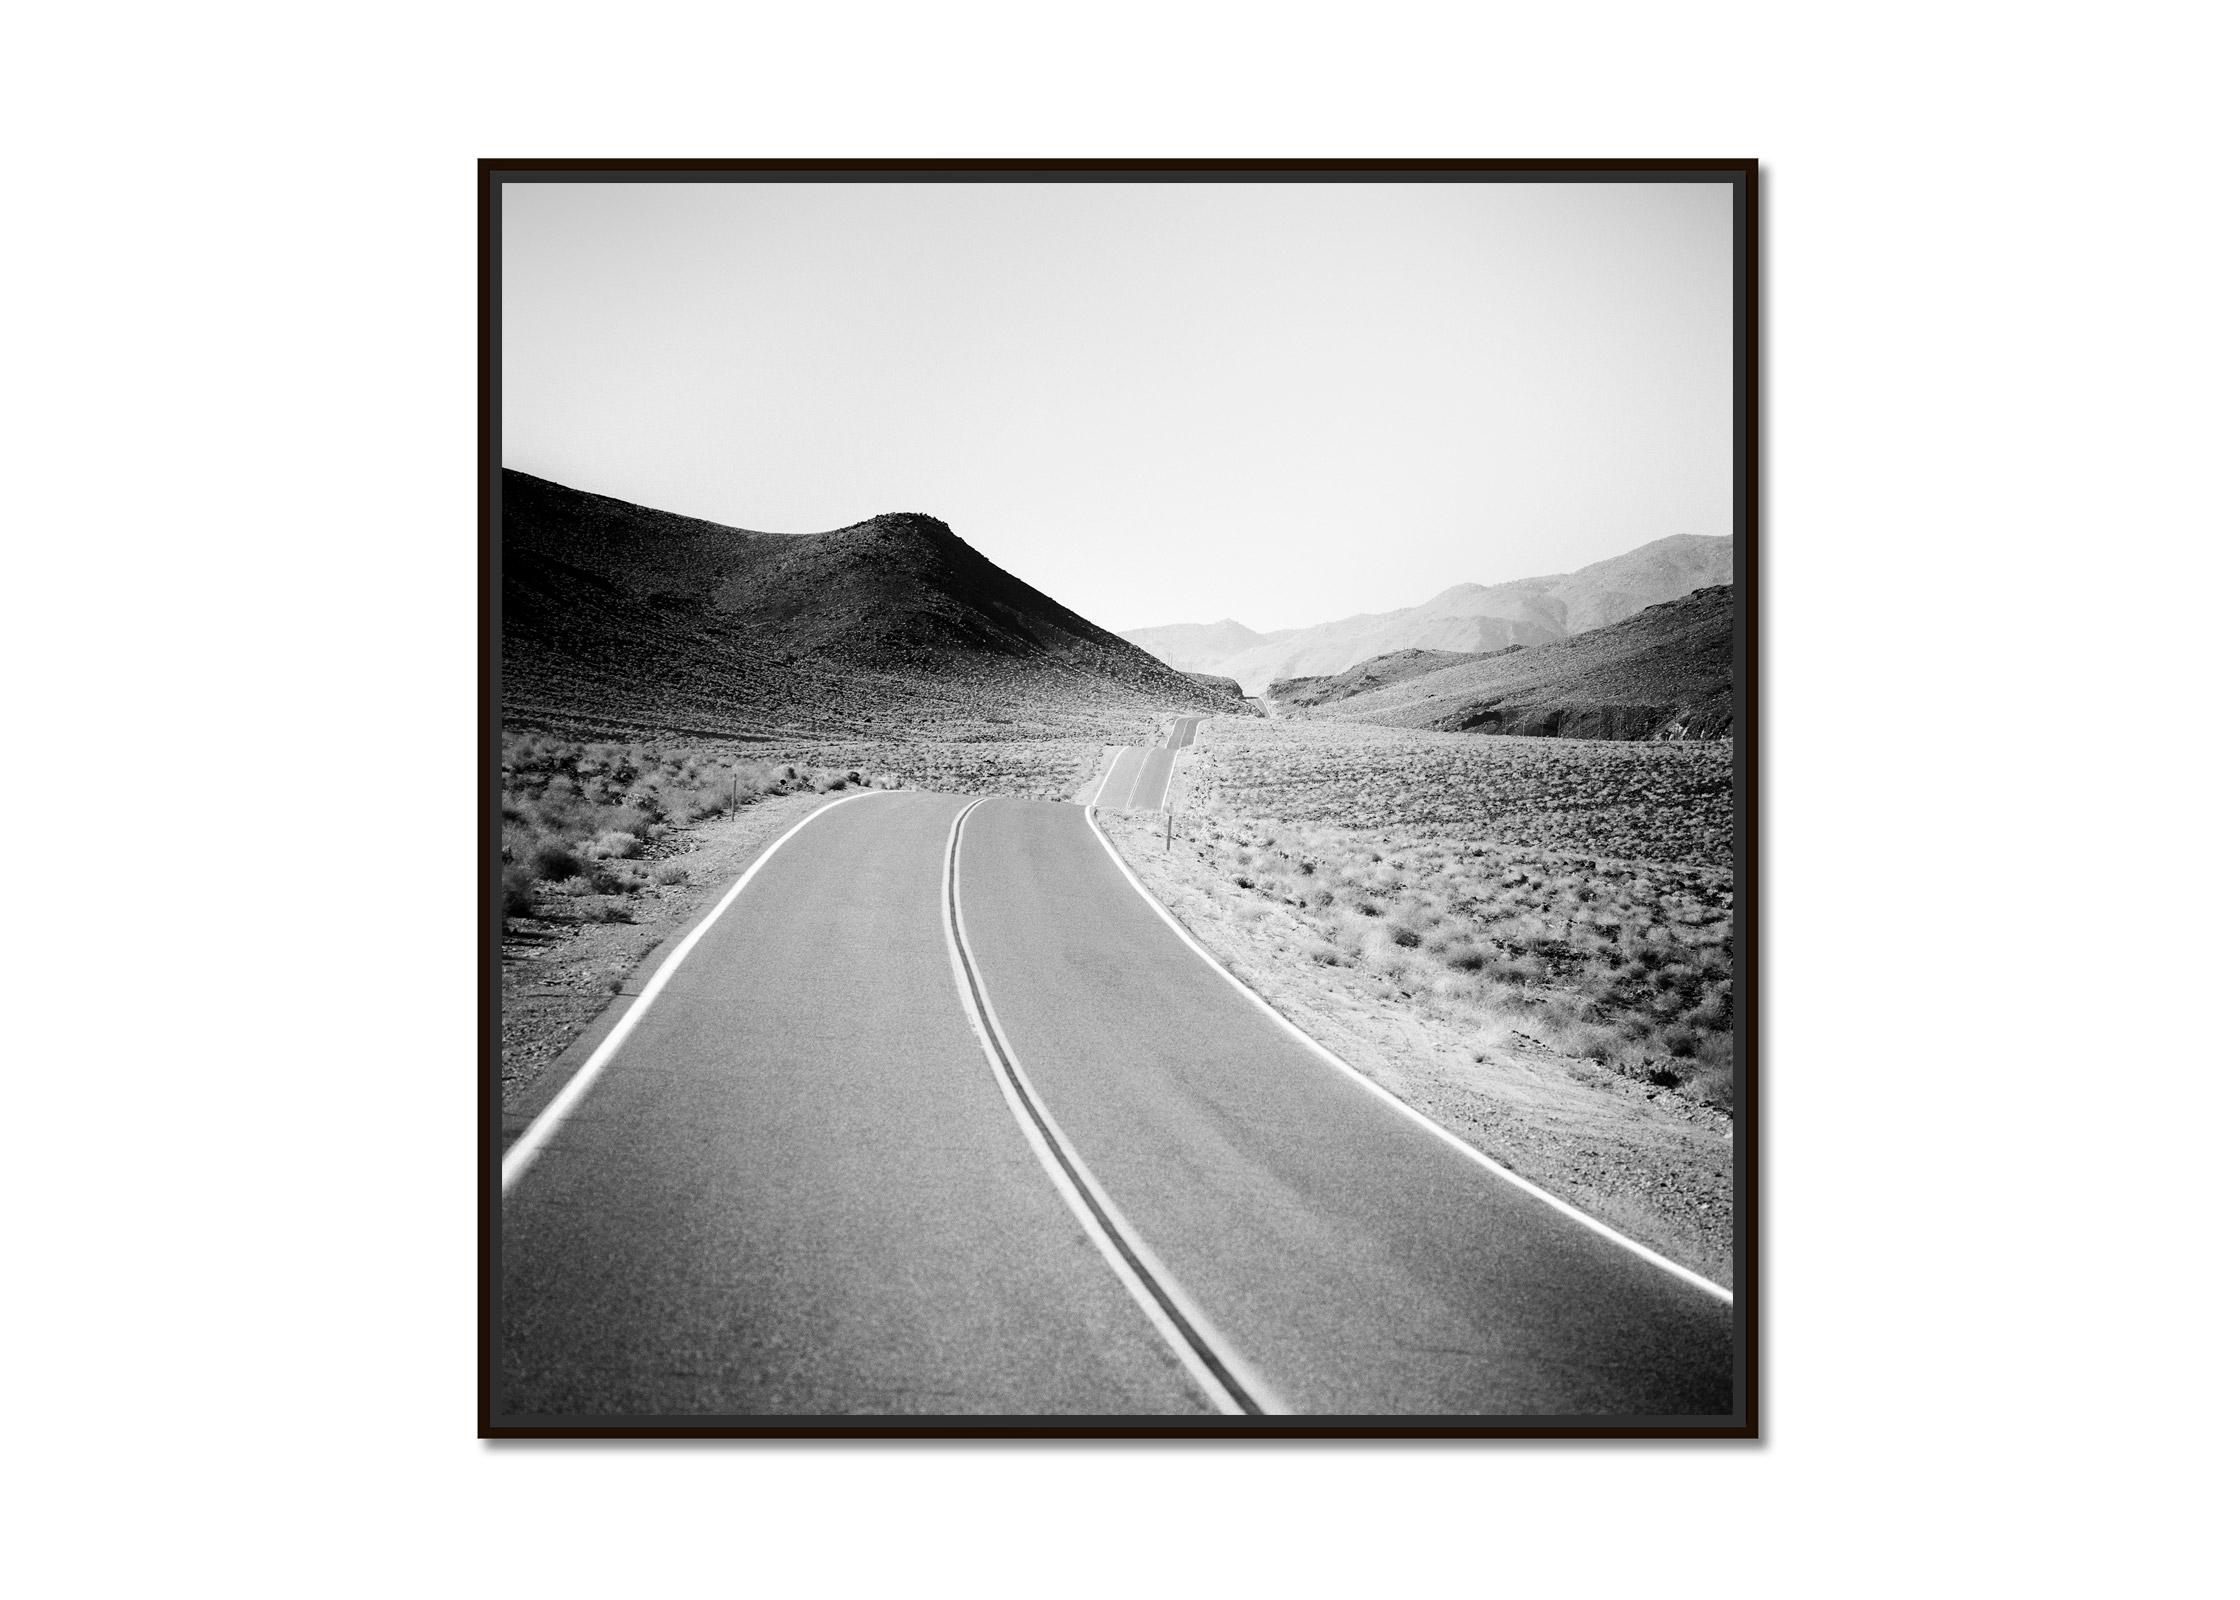 Way to Nowhere, Route 66, Arizona, USA, black white art landscape photography - Photograph by Gerald Berghammer